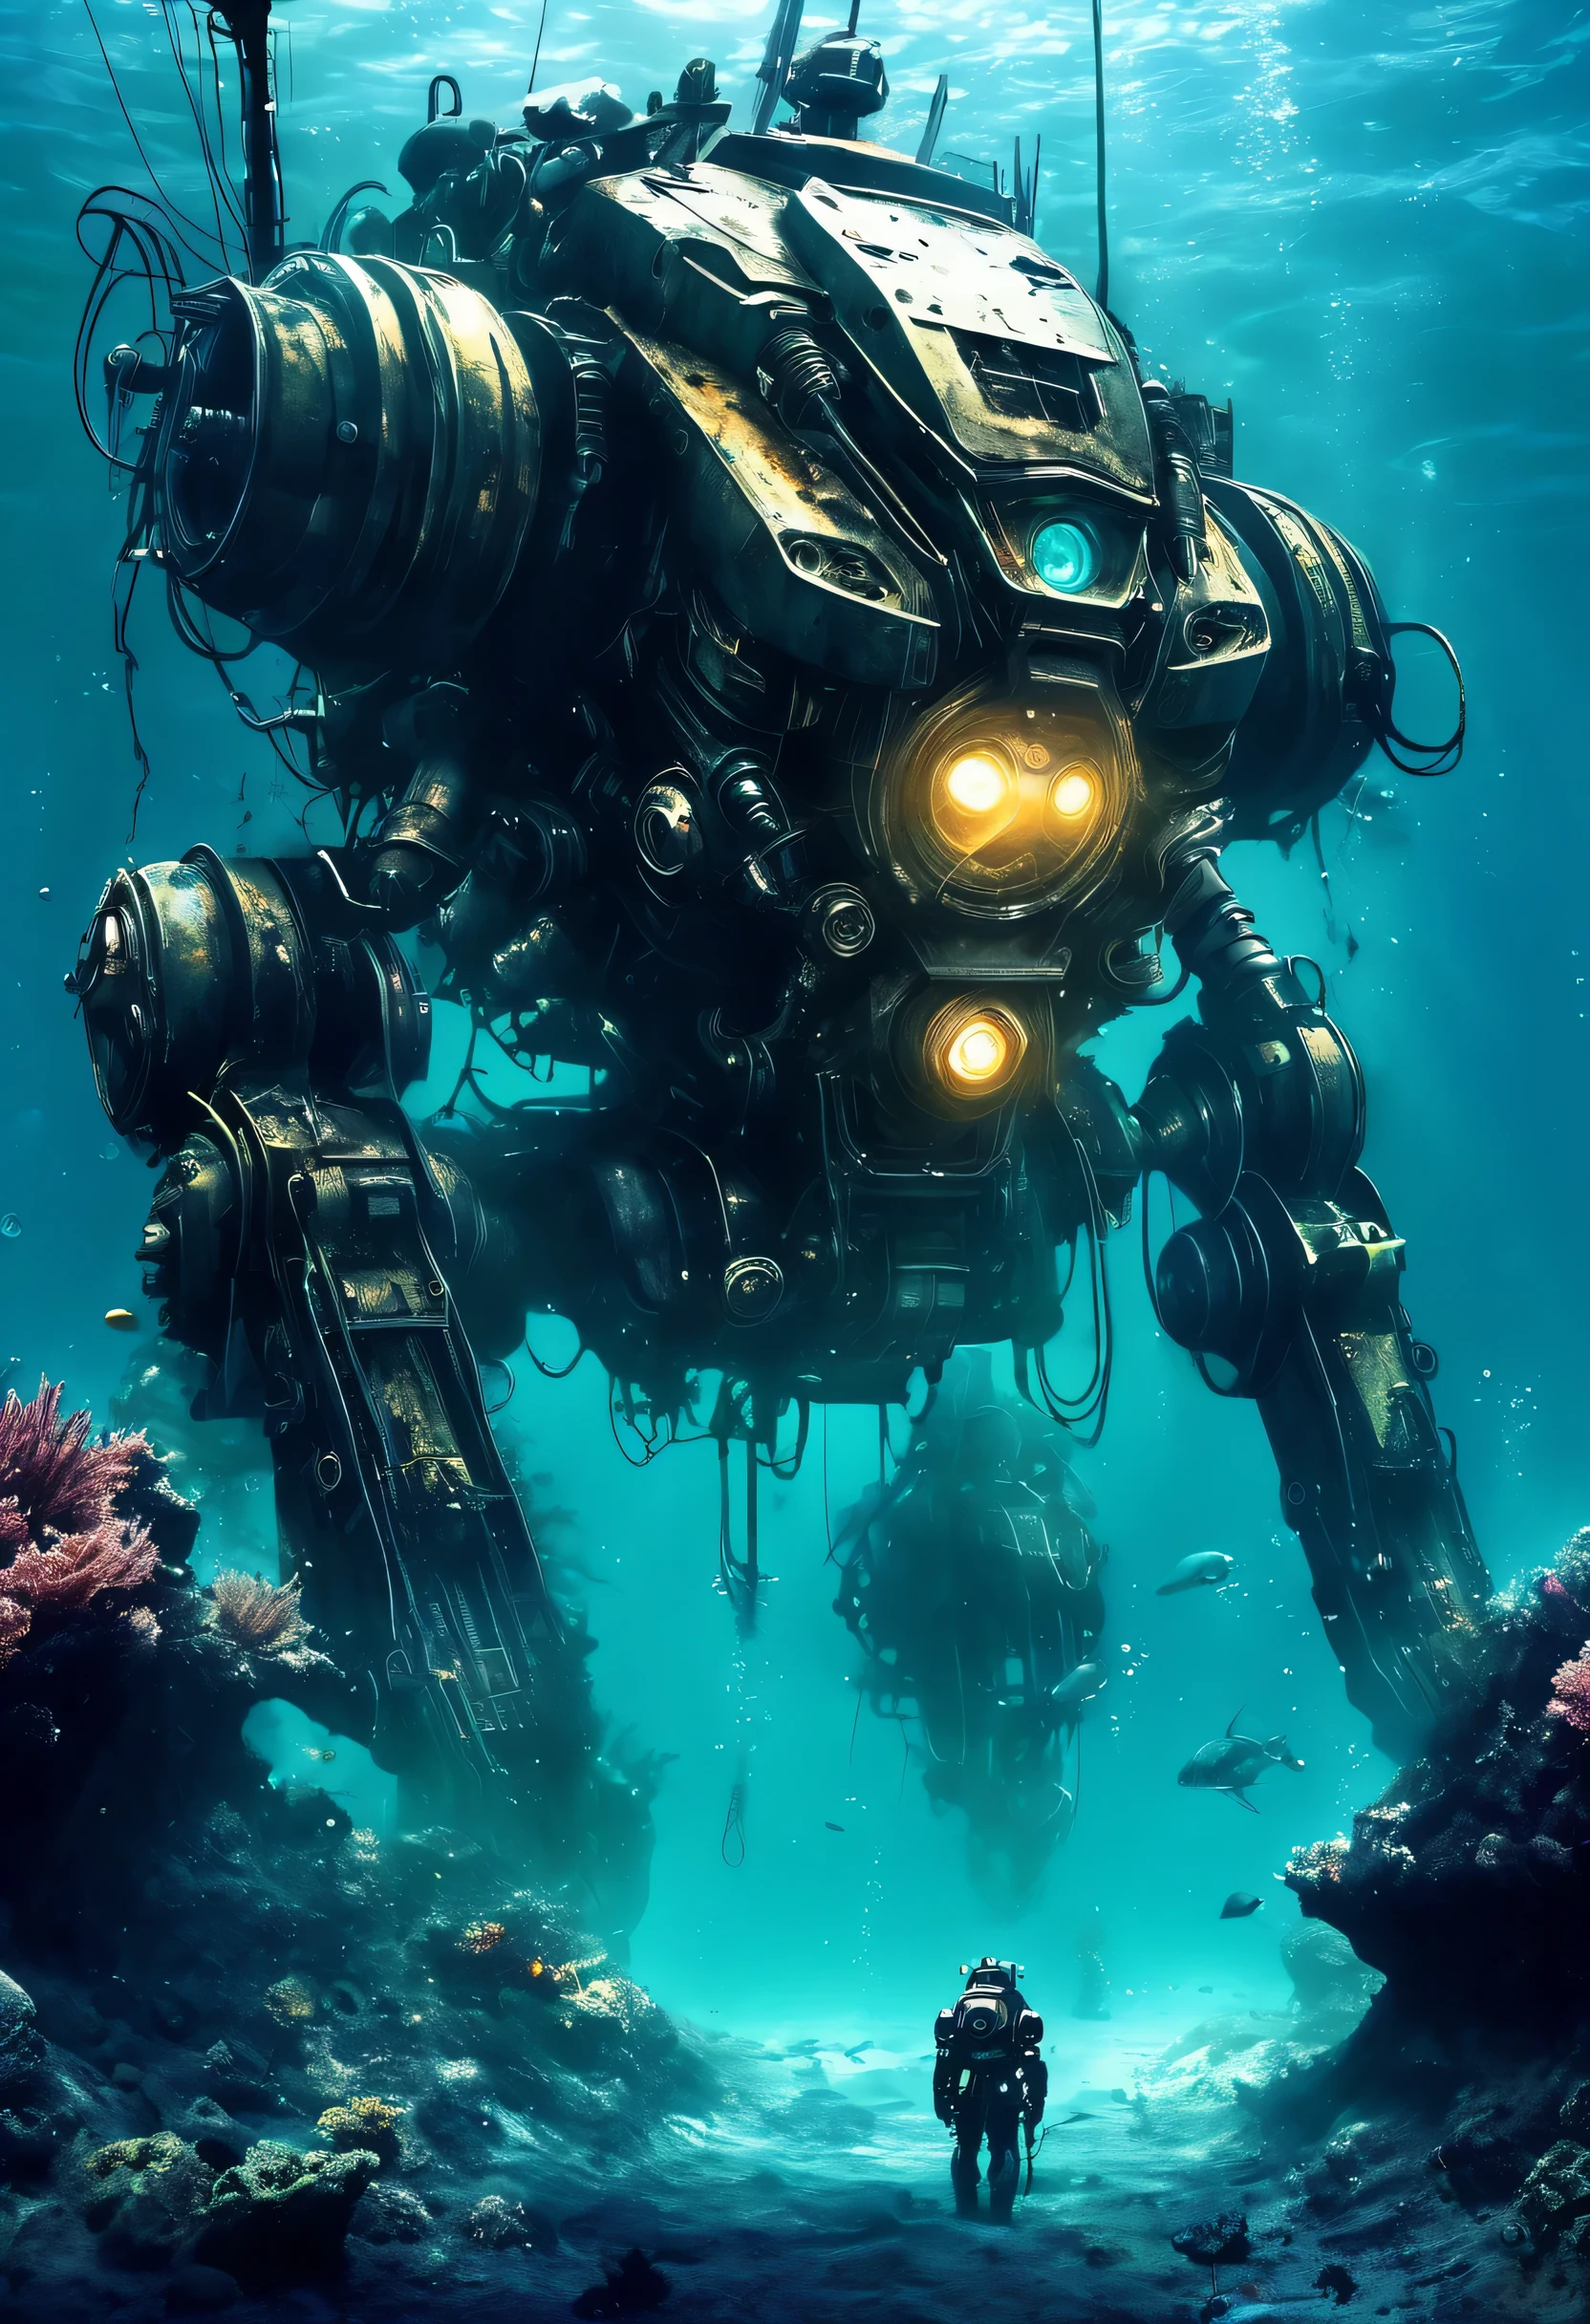 Deep Sea Scenery,The bottom of the sea,abandoned mecha:Fusion of futuristic science and steampunk,world without humans,arm,dirty,weapons,,Remains of a destroyed robot,lost peace,forsaken,dim,masterpiece,digital art,lonely,pessimism,dirty,dyeing,Mysterious,fantasy,The remains of a broken robot sleeping in the deep sea,Deep Sea Scenery:In detail